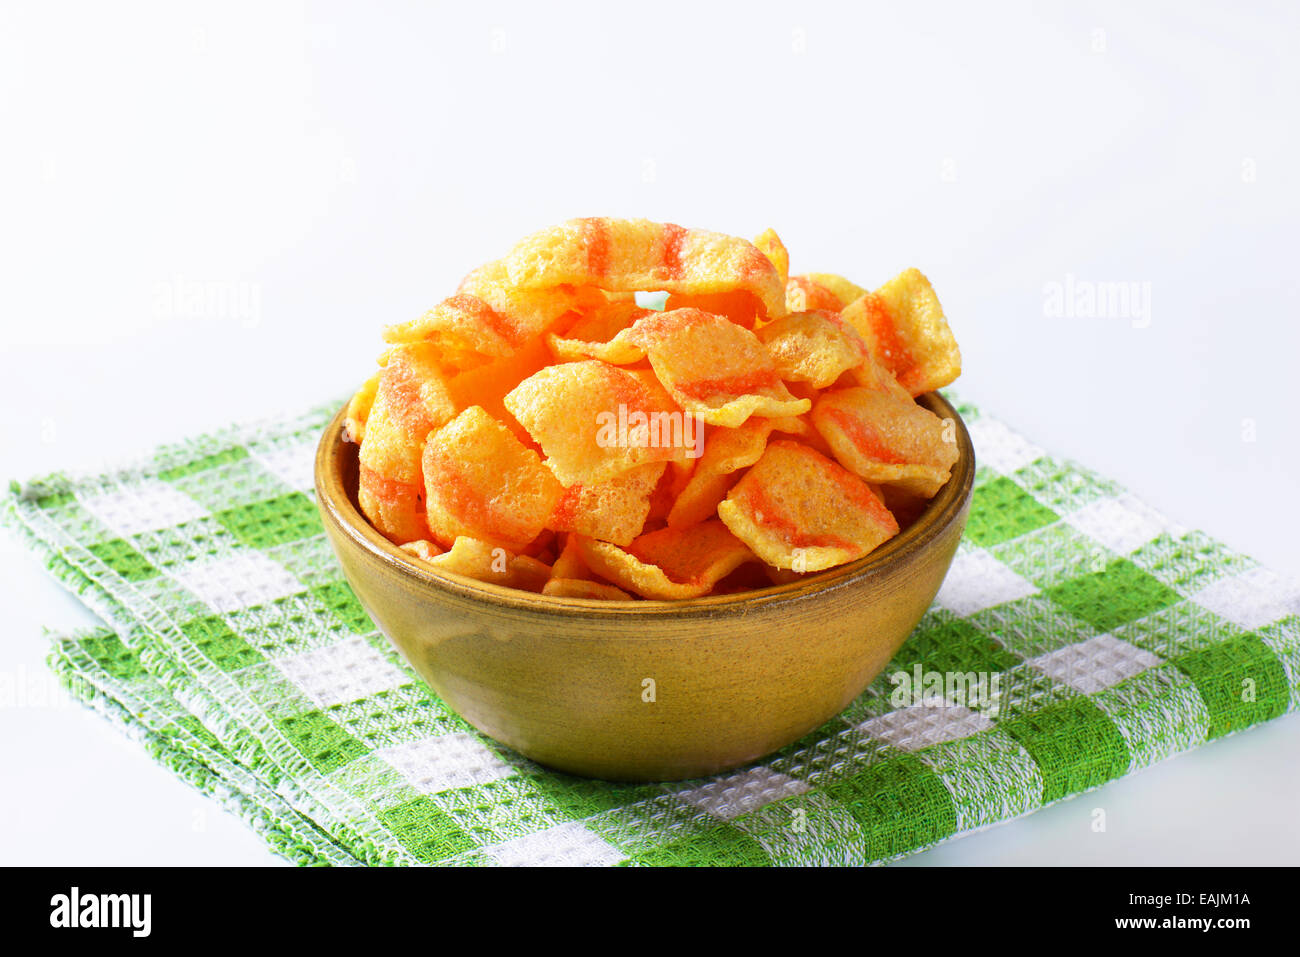 Bowl of bacon-flavored puffed wheat chips Stock Photo